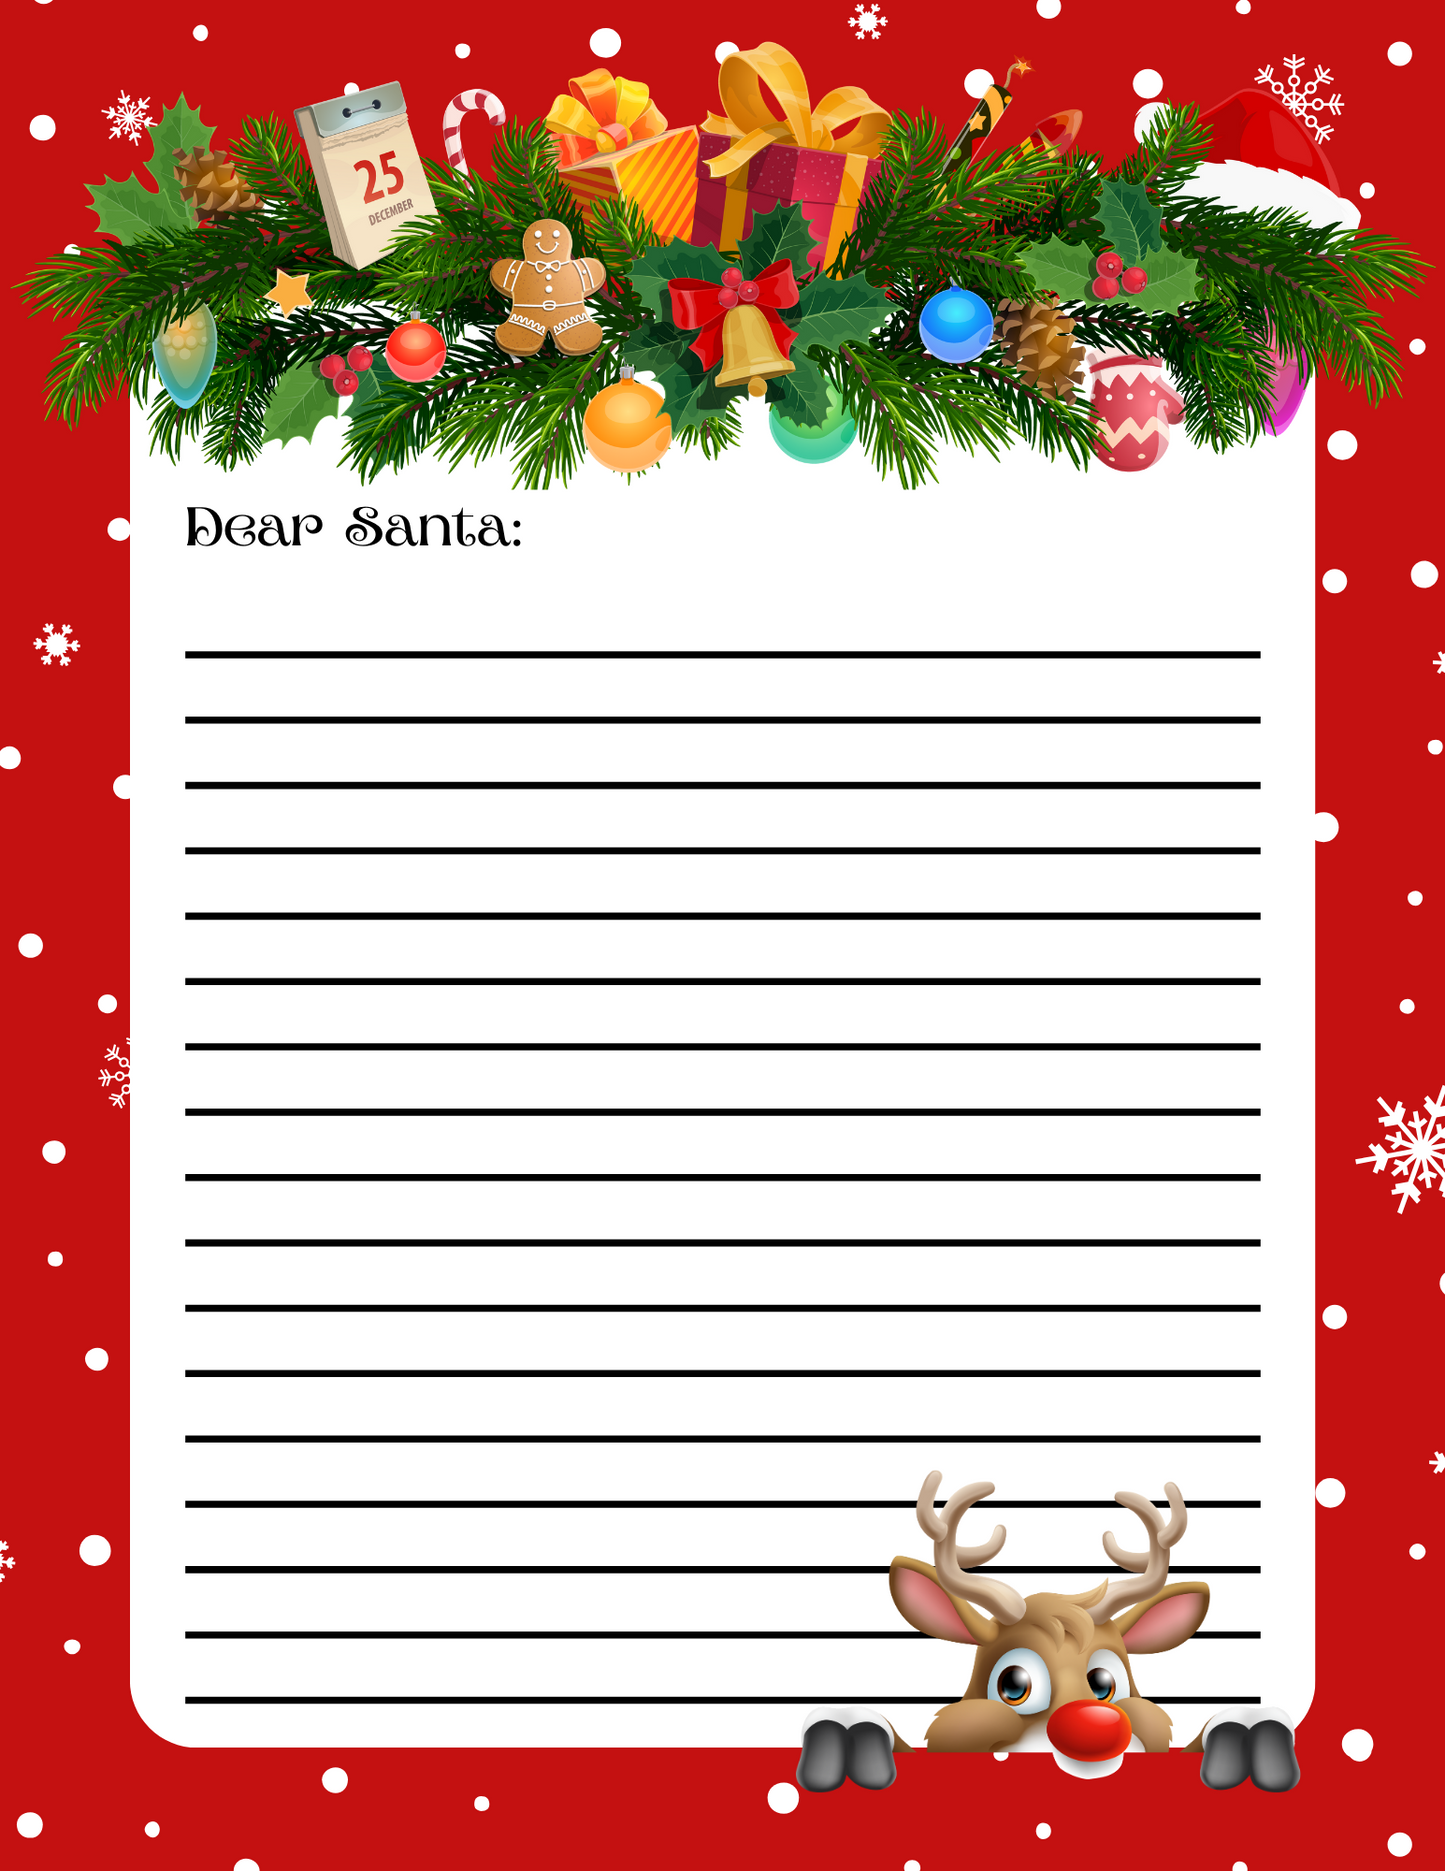 ULTIMATE SANTA BUNDLE | Letter from Santa | Custom Letter From Santa for Kids | Mailed to Your Child from the North Pole